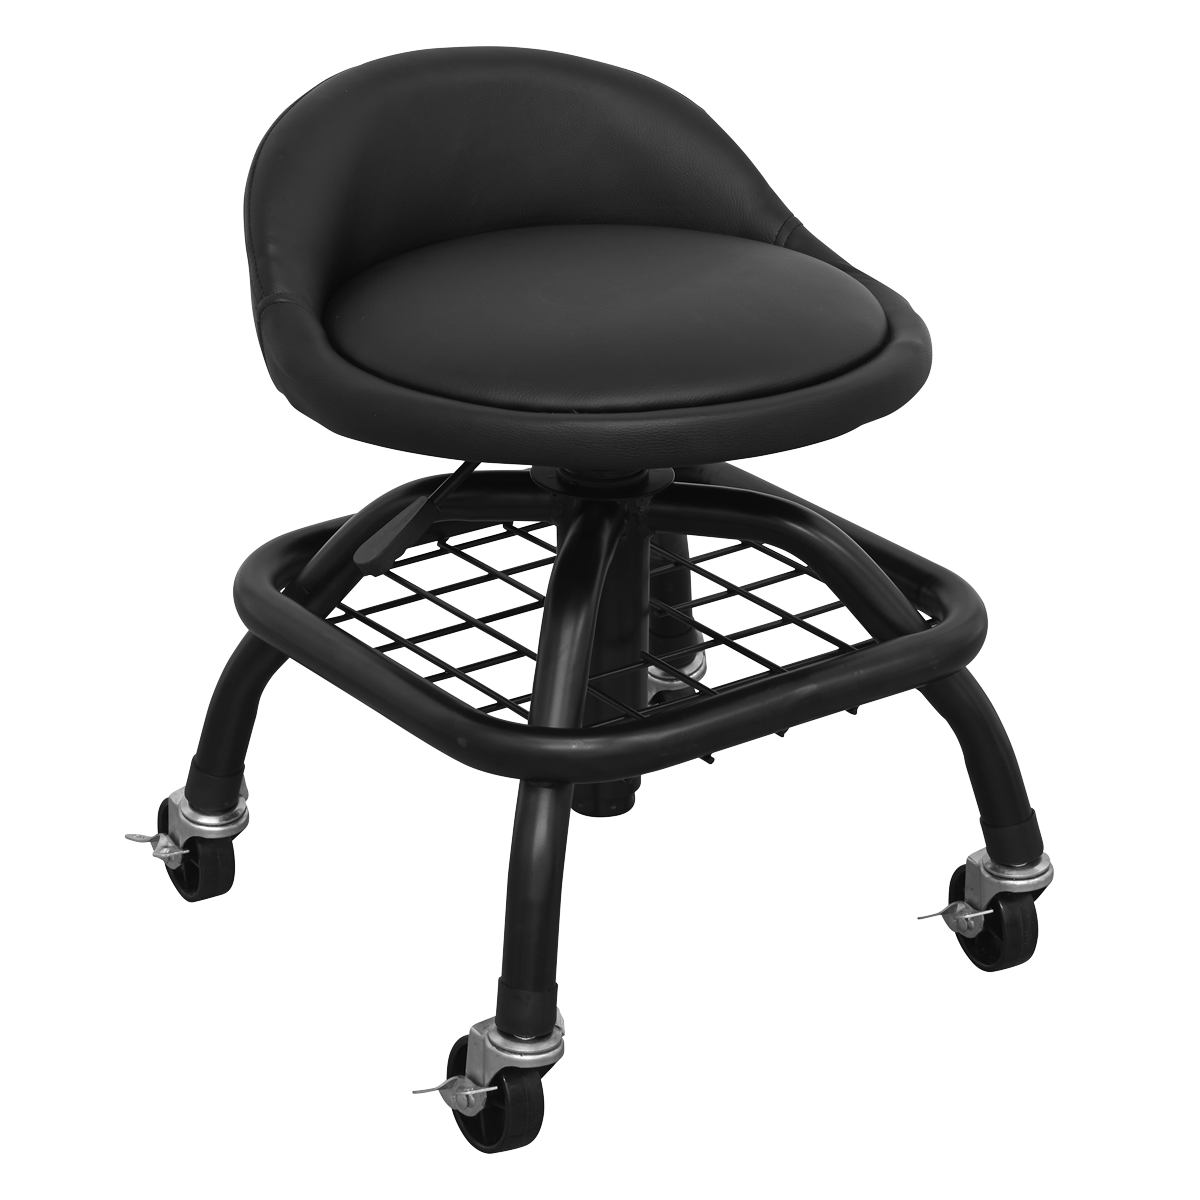 Creeper Stool Pneumatic with Adjustable Height Swivel Seat & Back Rest - SCR02B - Farming Parts